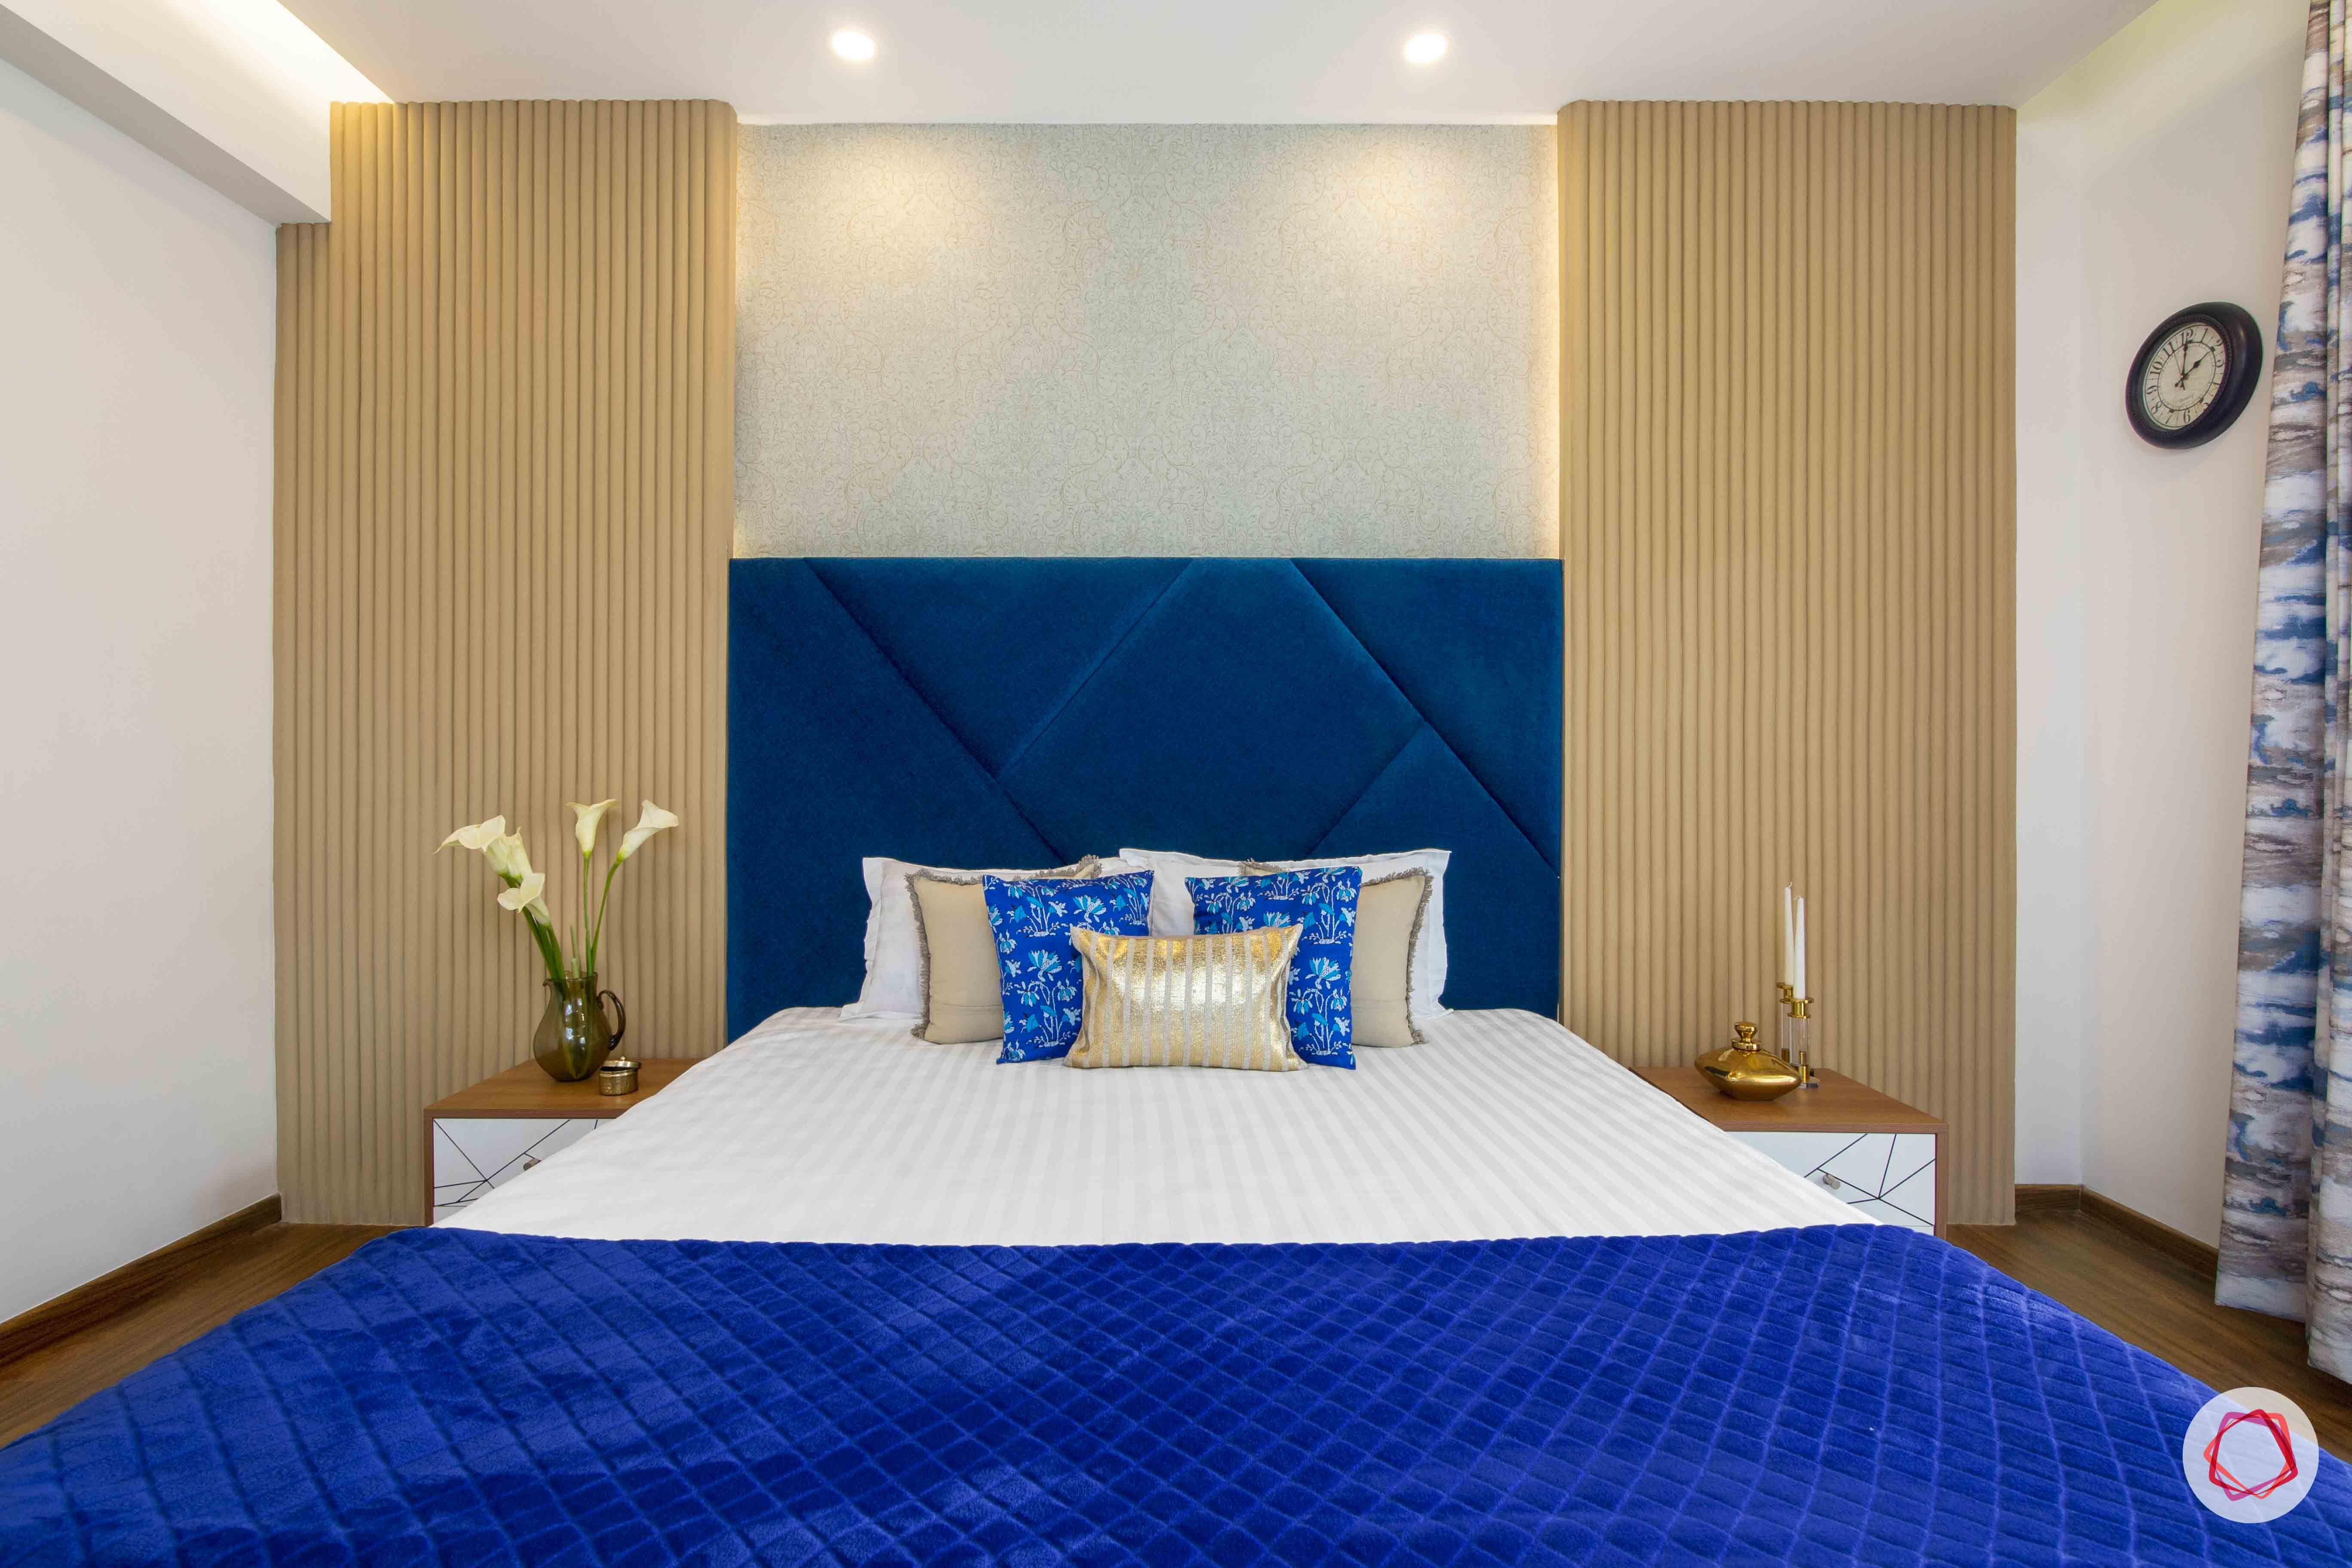 3 bedroom flat design-master bedroom decor-fabric headboard-side table designs-types of wall panelling